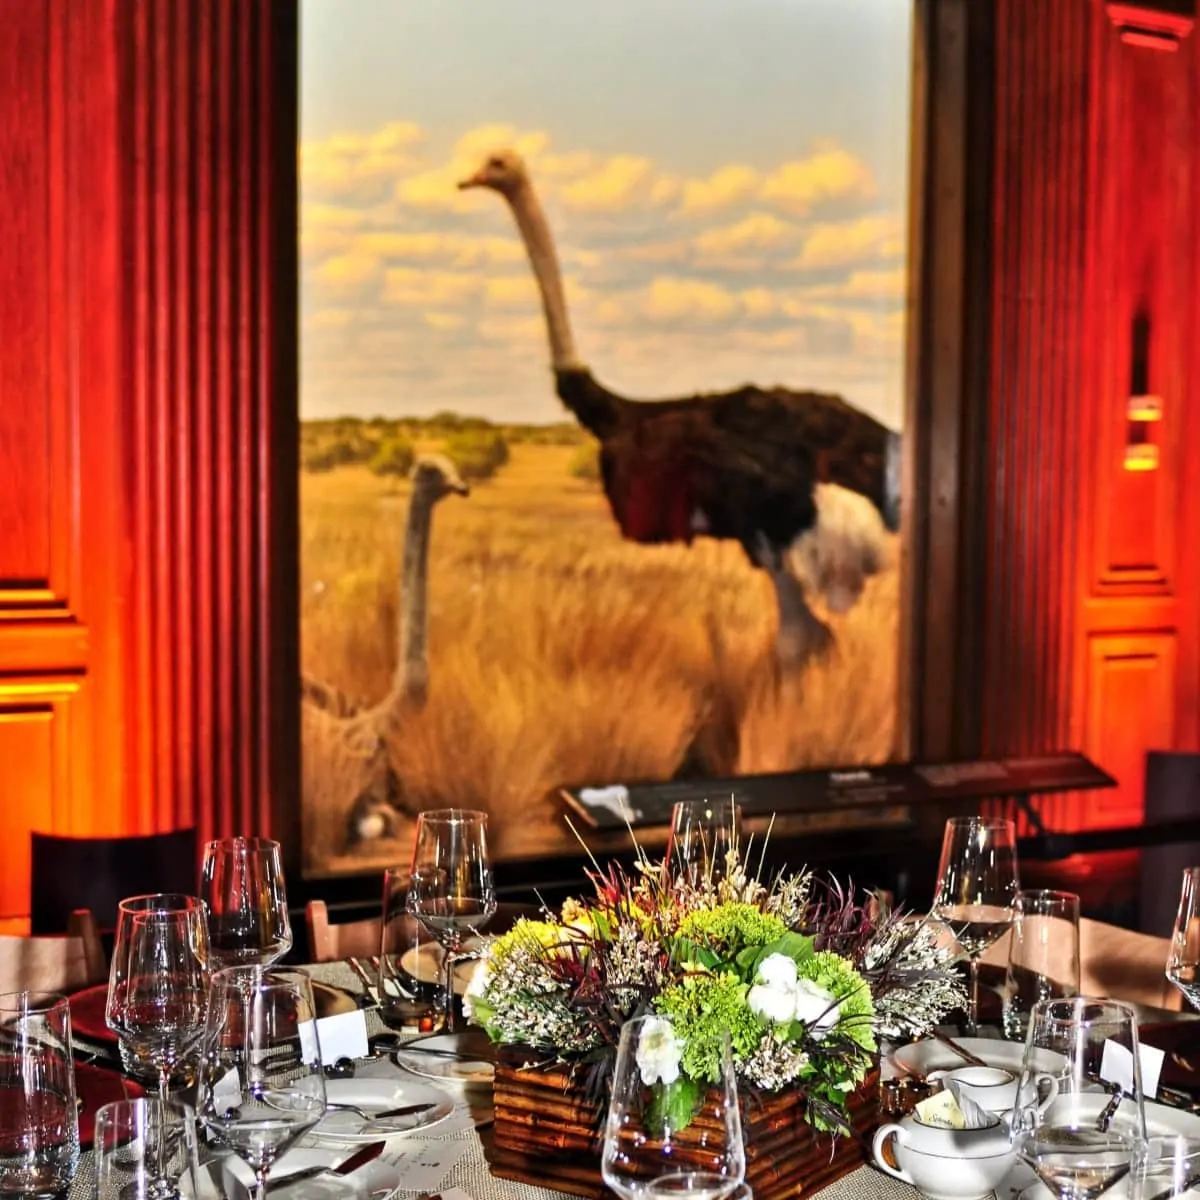 A dining room with a table set for a meal by a catering service in Los Angeles, overlooked by a large window showing an ostrich in a field at sunset.